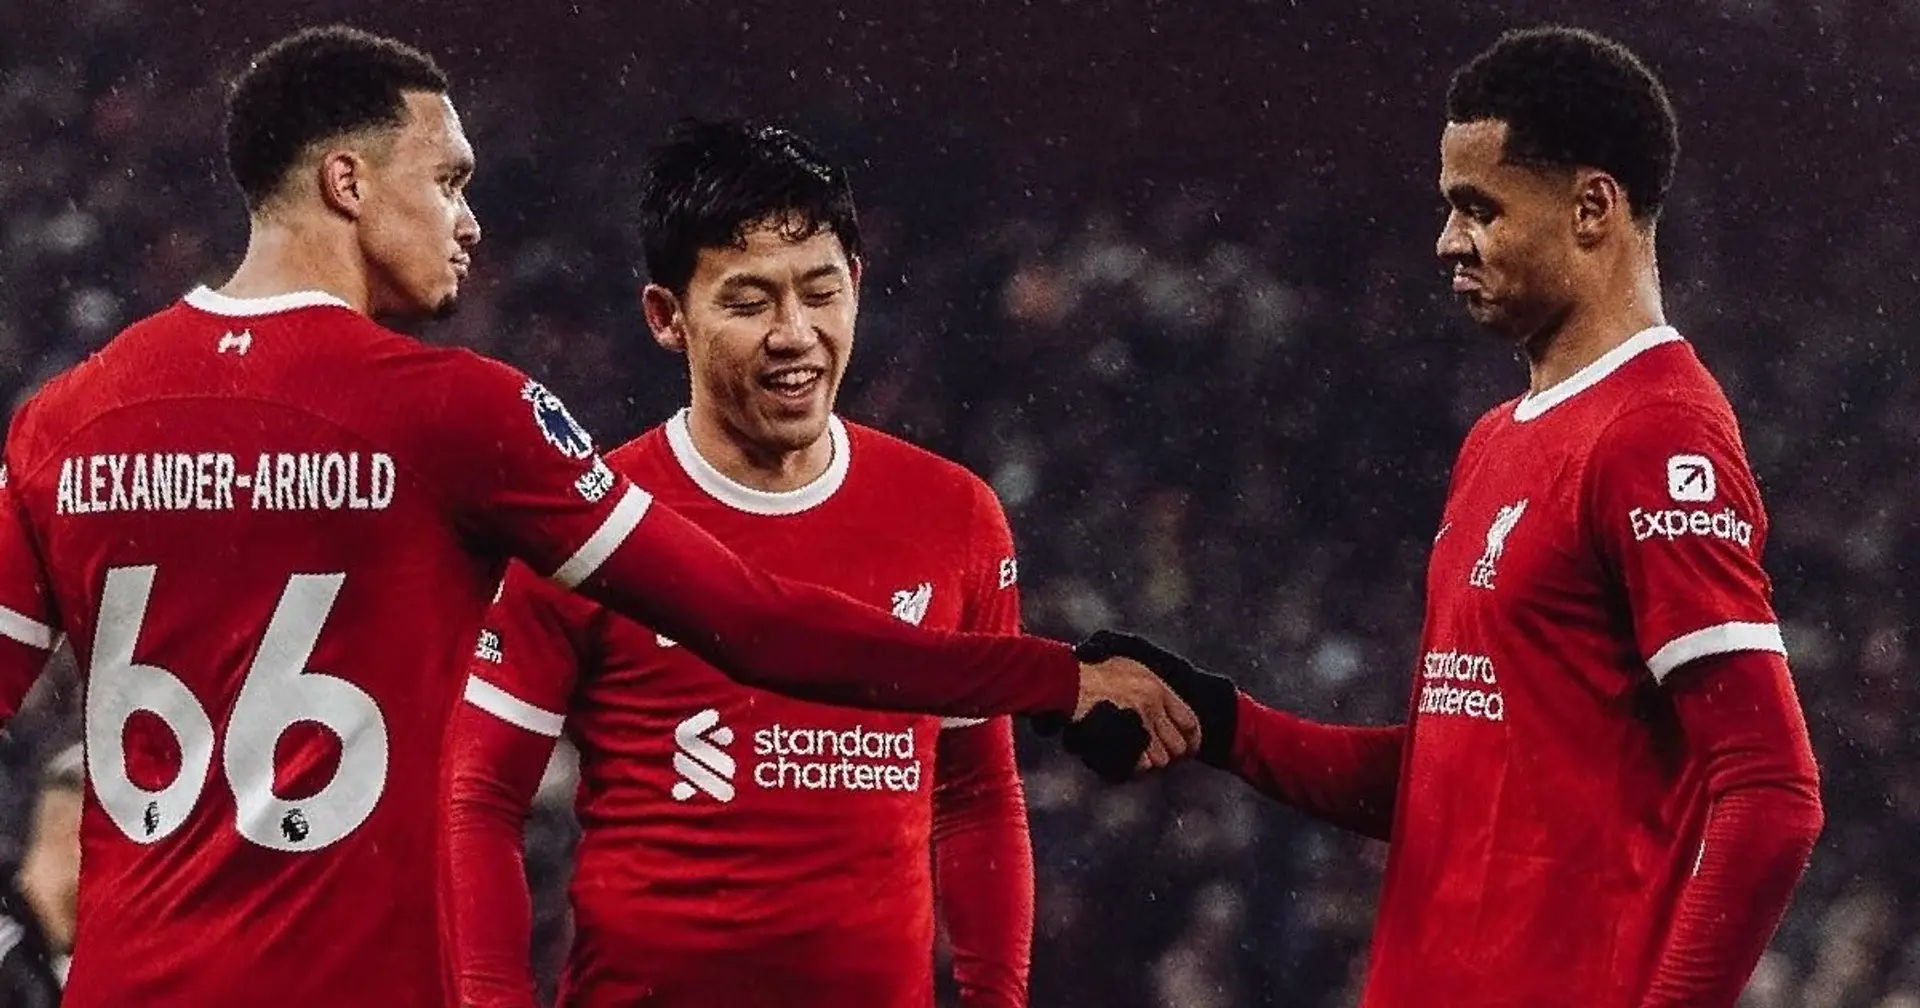 'Pleasure to meet you old chap': Fans loving Trent and Gakpo's new handshake celebration